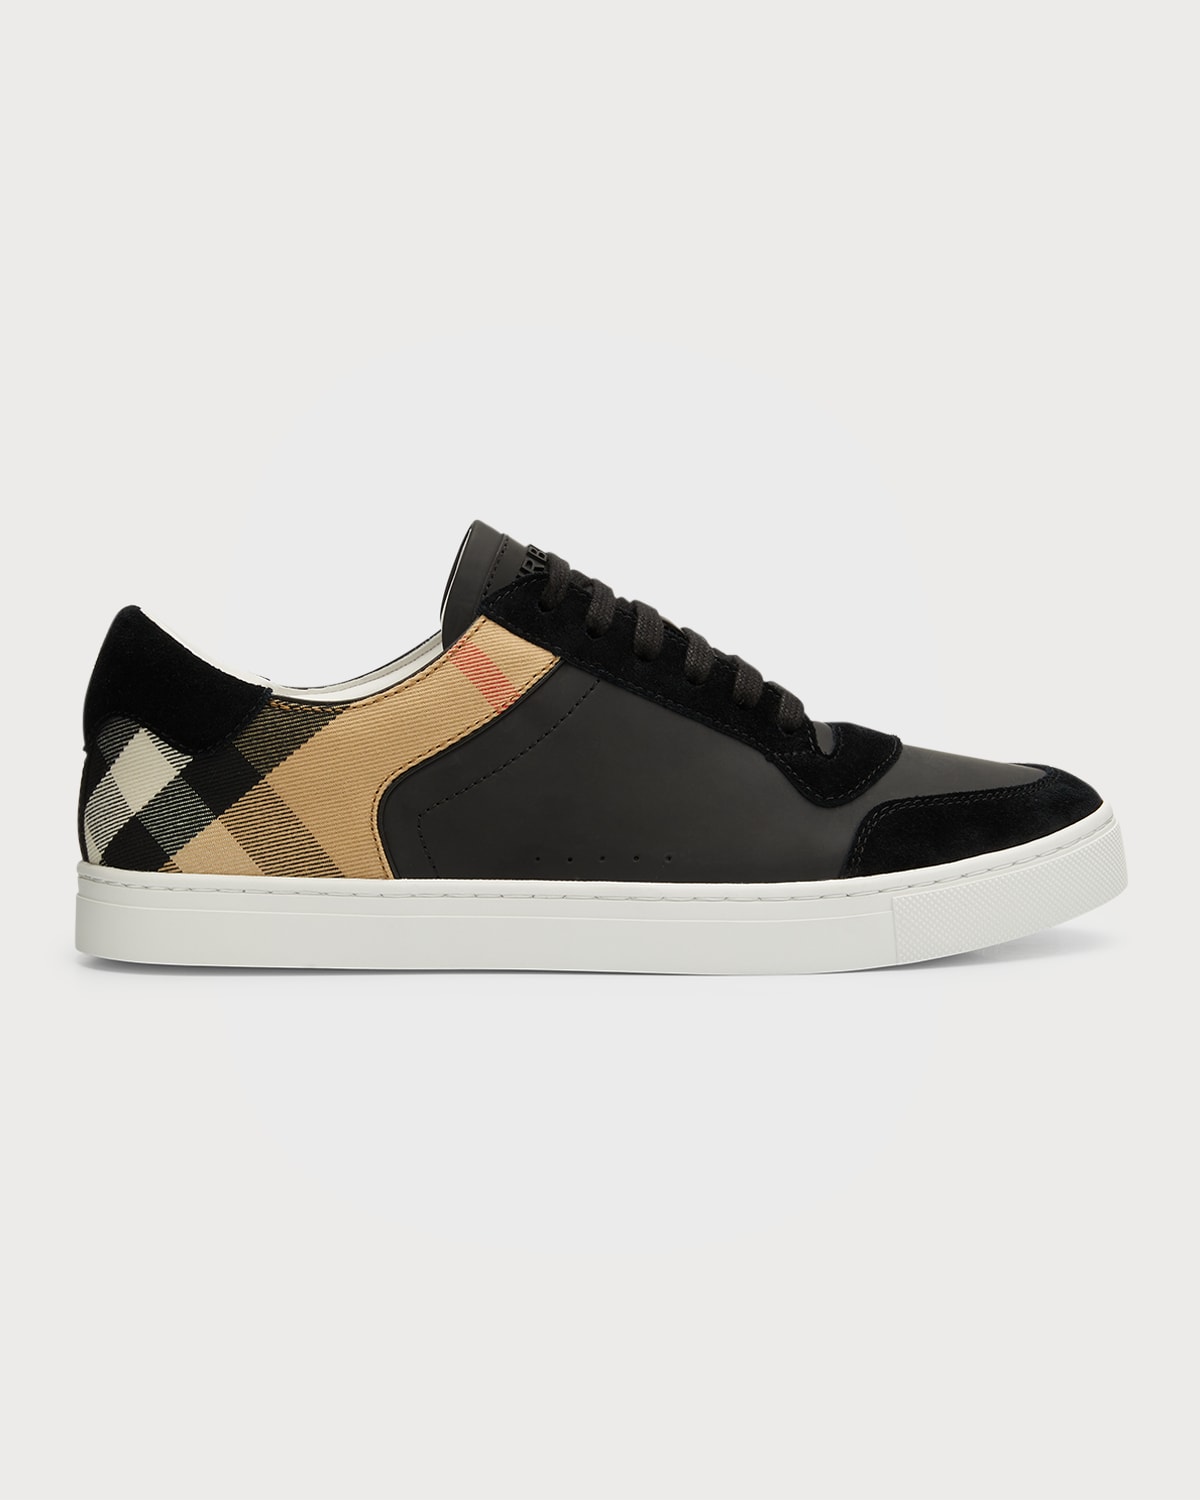 Burberry Men's Reeth Leather House Check Low-Top Sneakers, Black